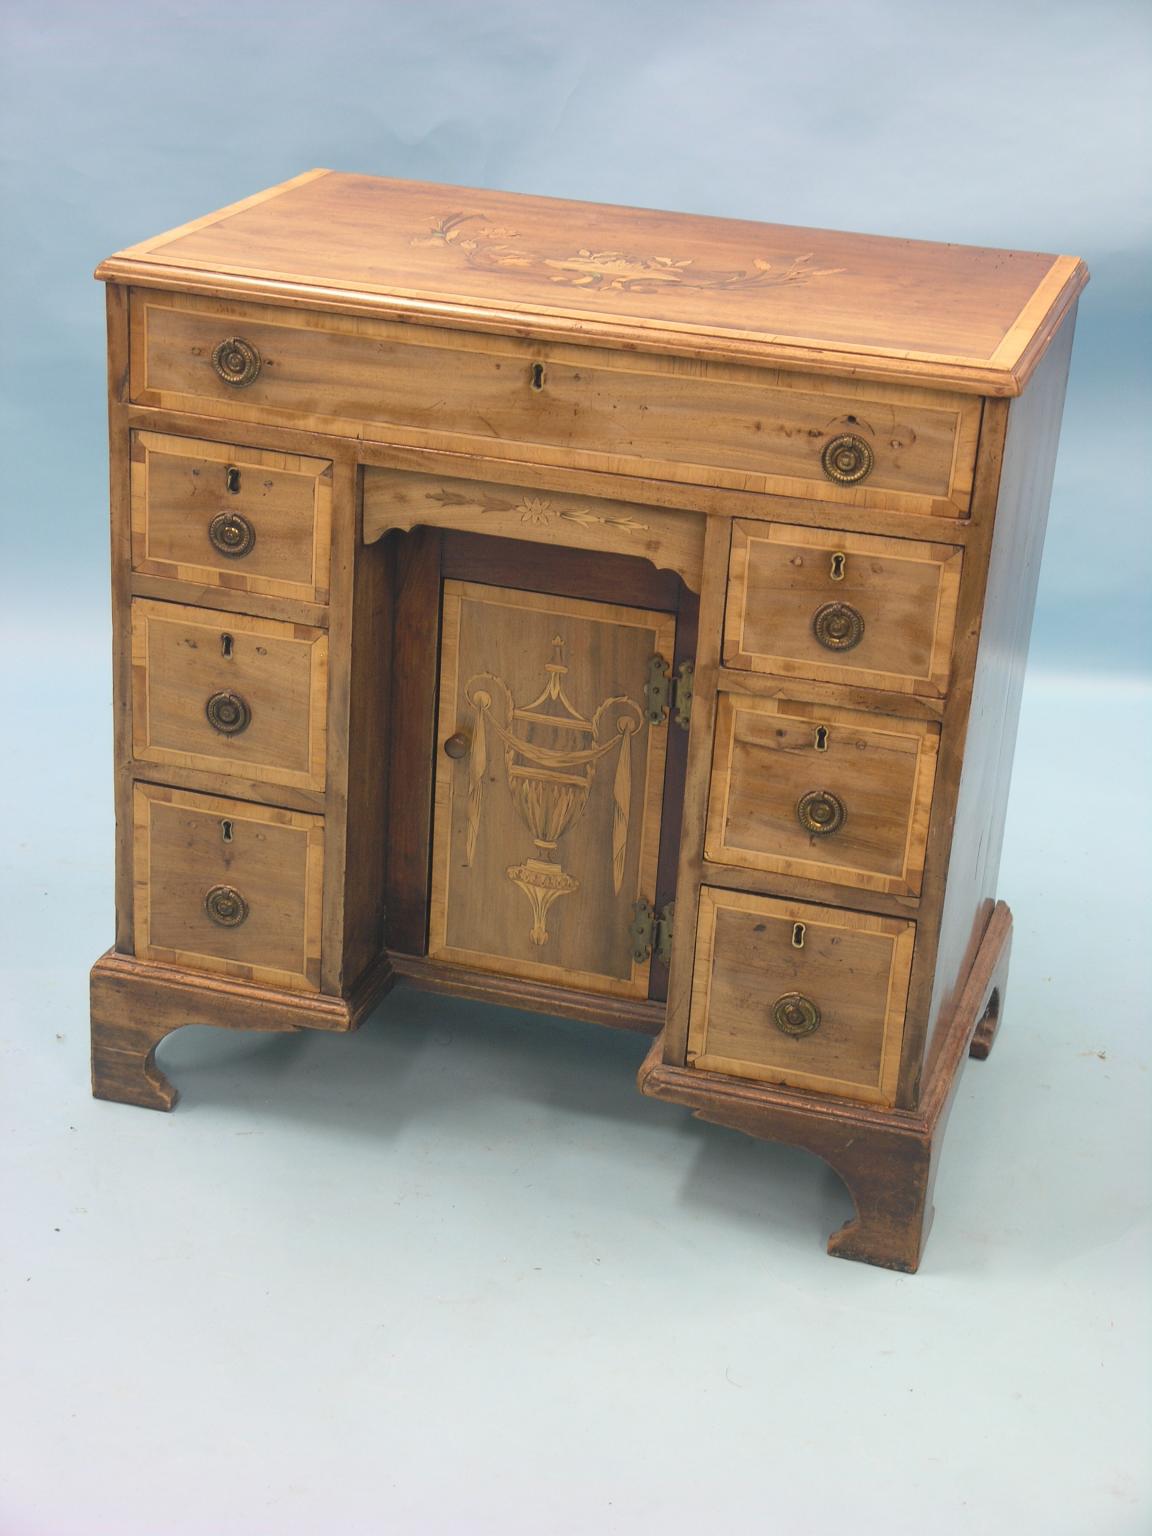 A 19th century inlaid and banded mahogany kneehole pedestal desk, in George III taste, having a